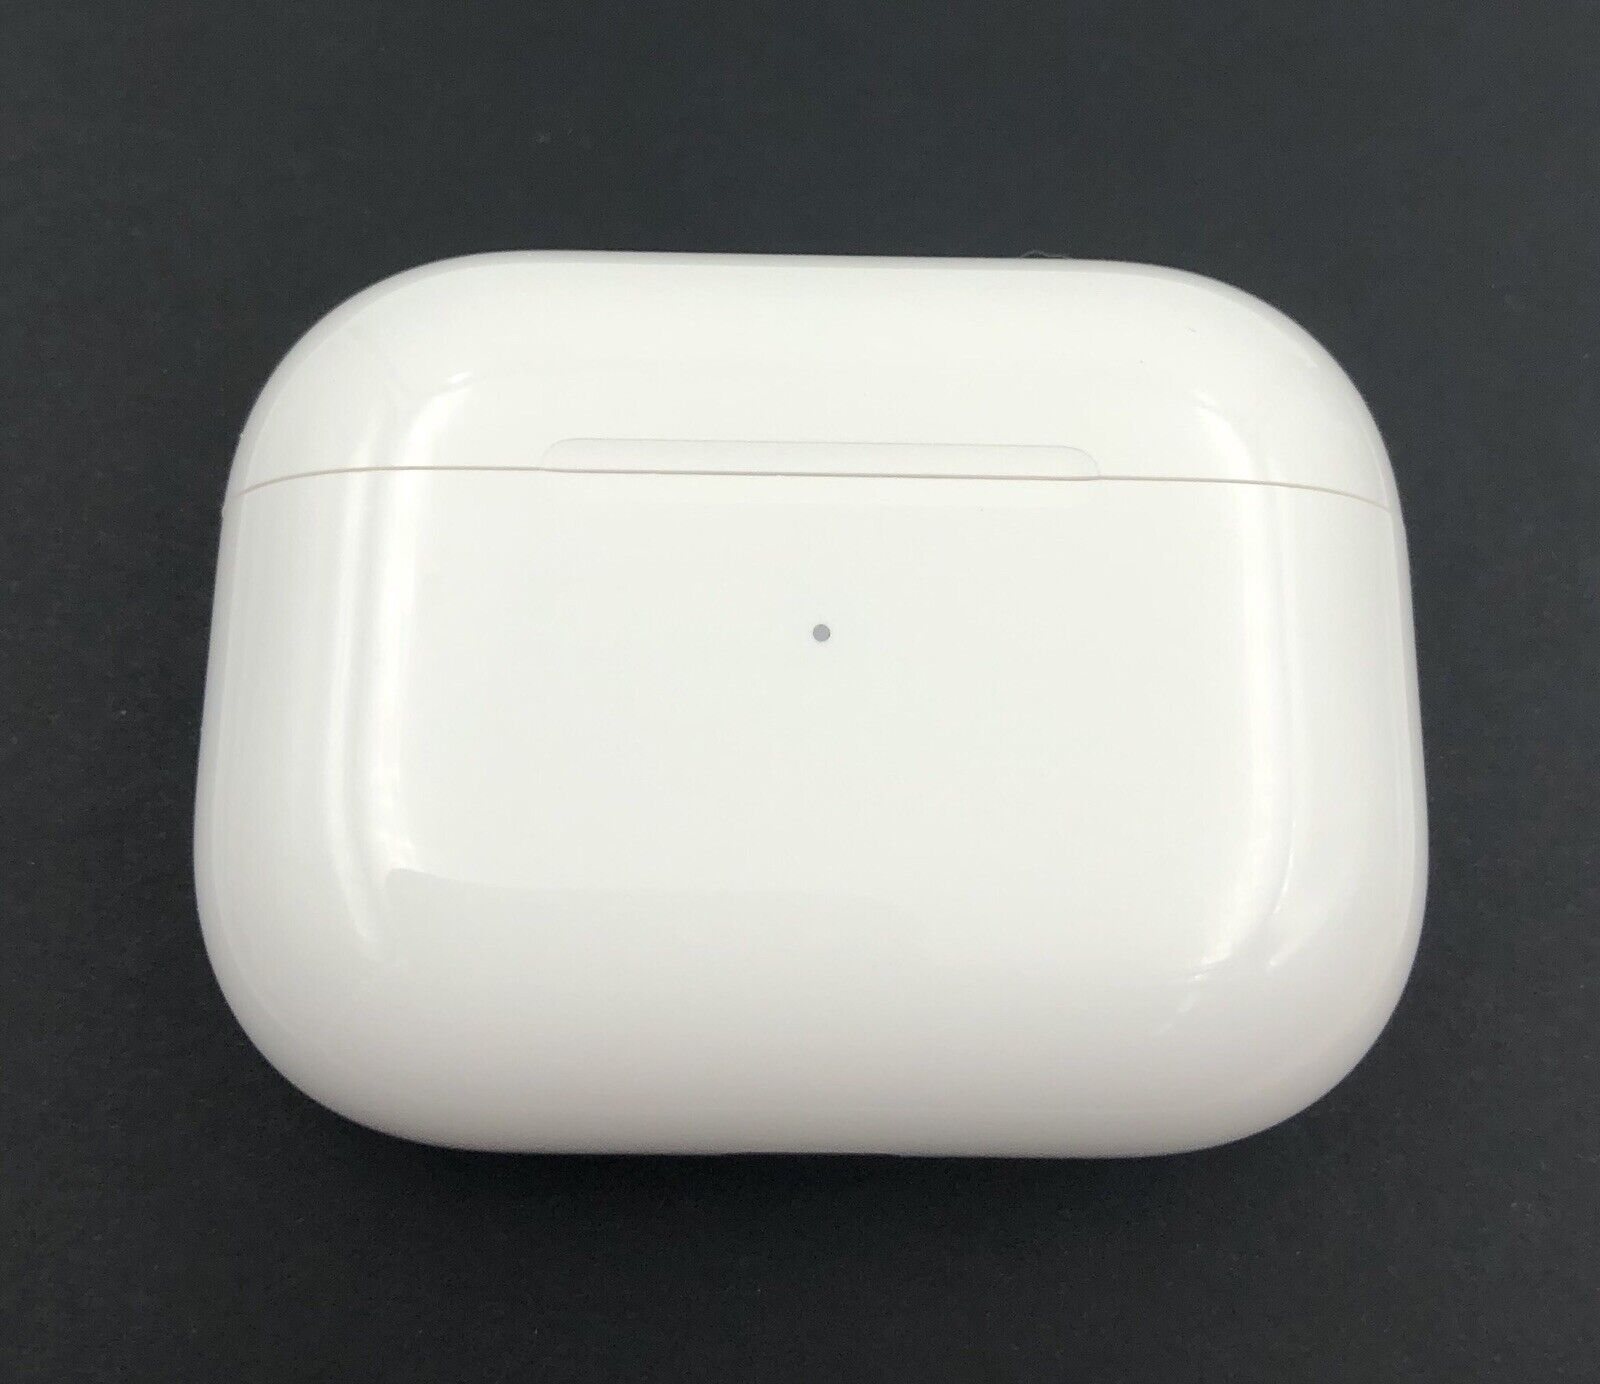 Original Apple AirPods PRO Wireless Charging Case (A2190 